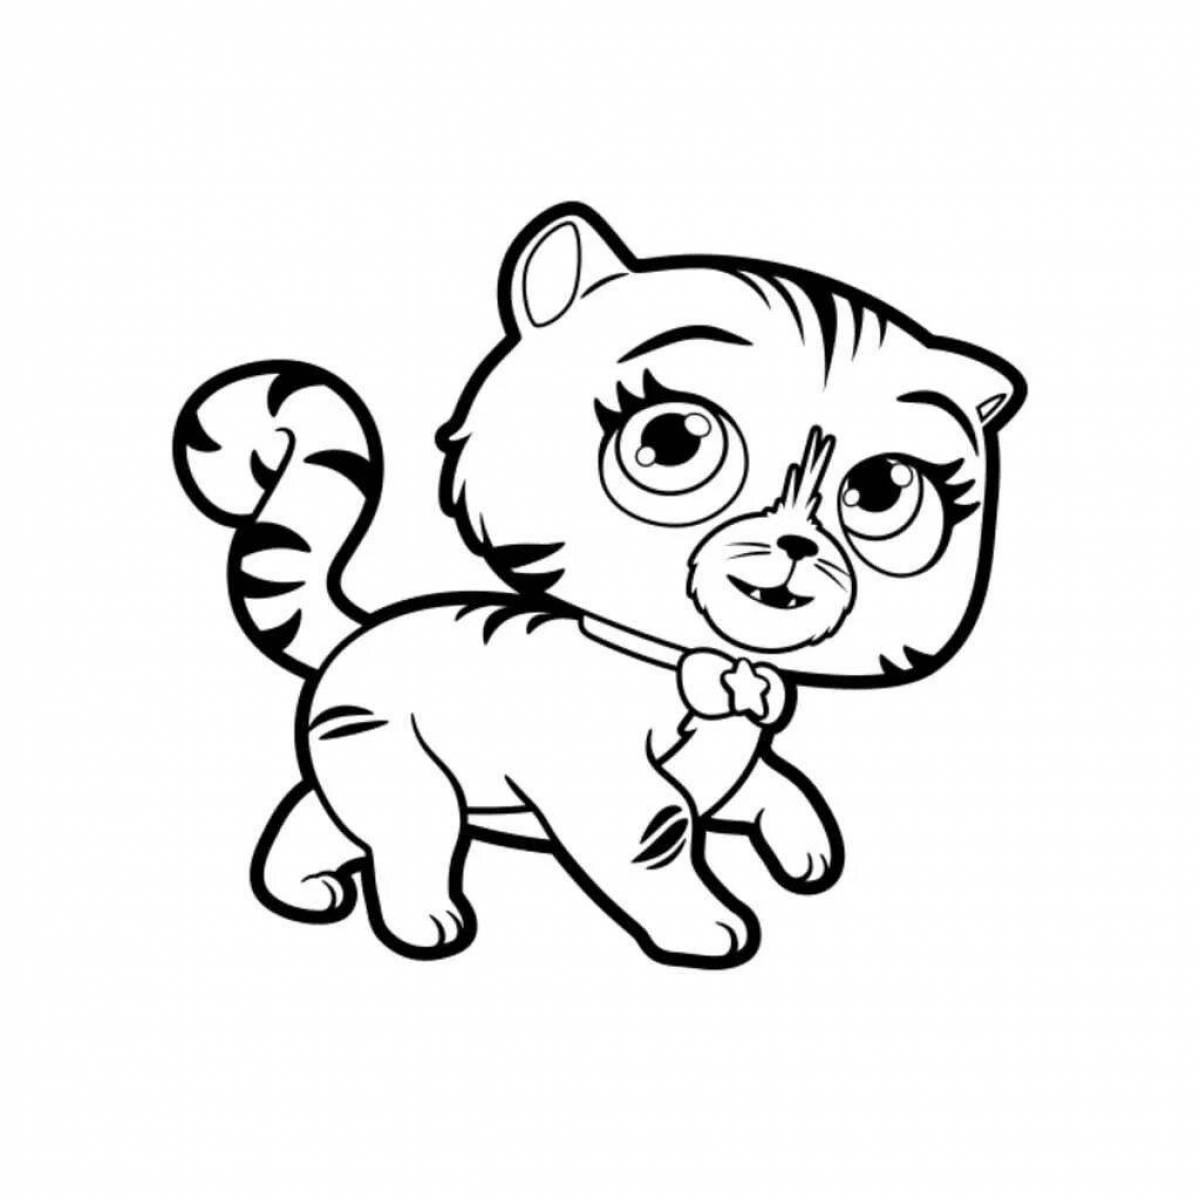 Snuggable little cute kittens coloring pages